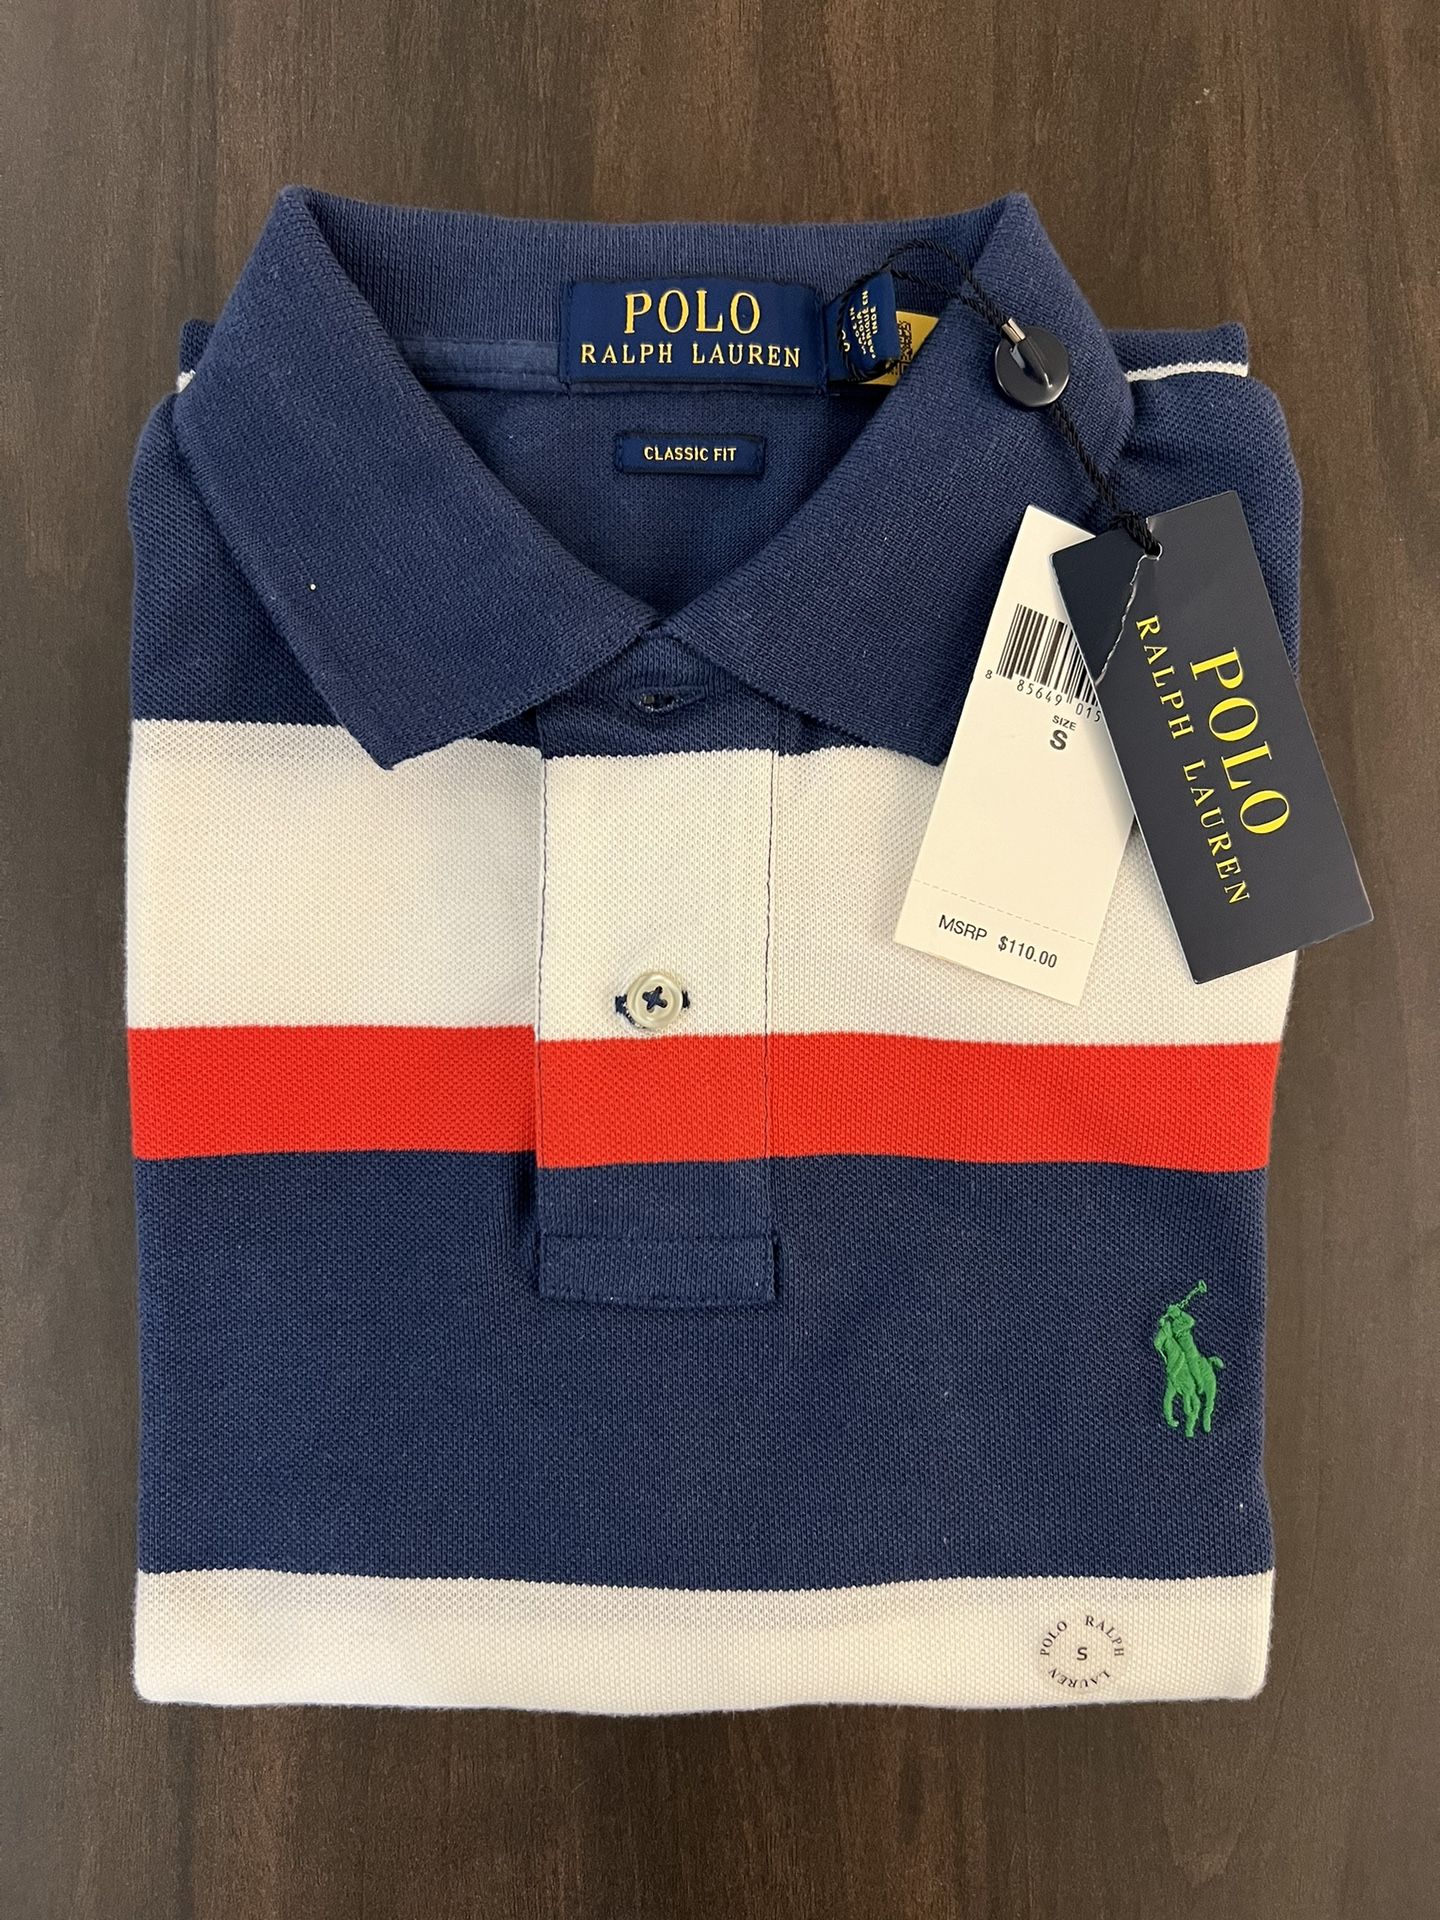 Polo Ralph Lauren T Shirt - New with Tags - Size S (small)